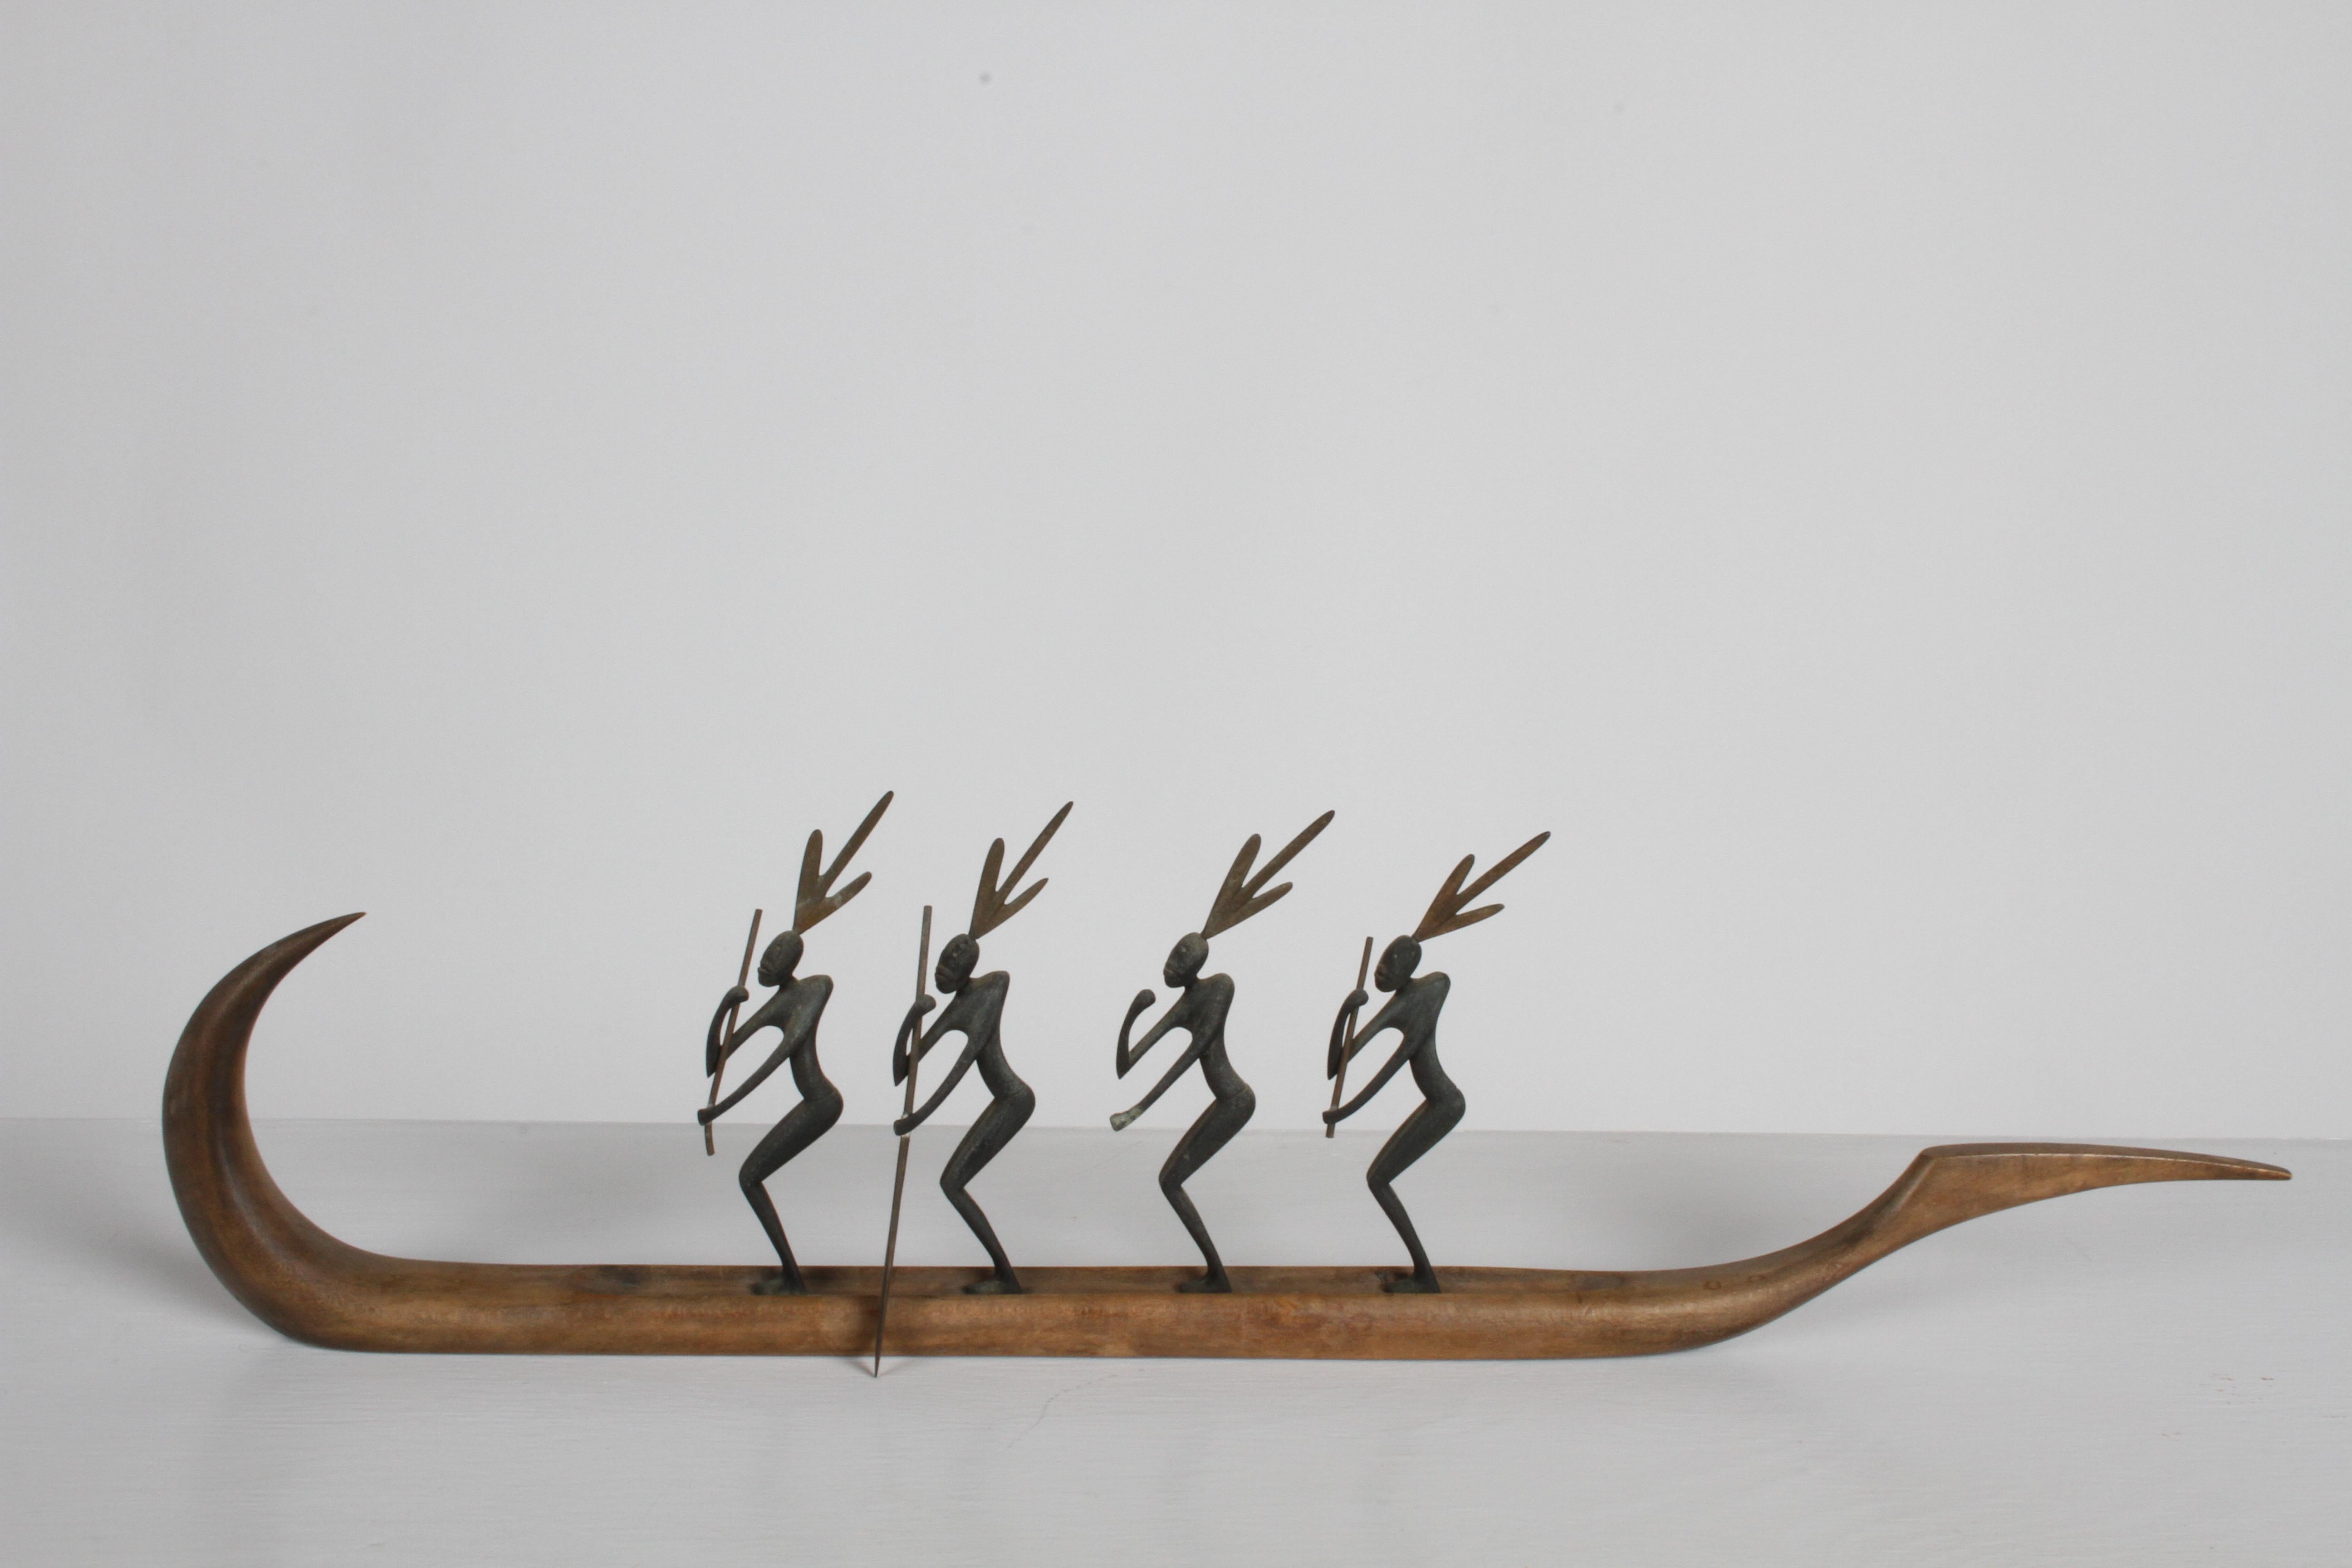 Karl Hagenauer sculpted wooden canoe with four bronze standing African paddlers with black patina, having bronze headdresses and bronze paddles. Bottom has stamped Handmade Hagenauer-Wien, circular WHW and made in Austria. Sold as-is with missing